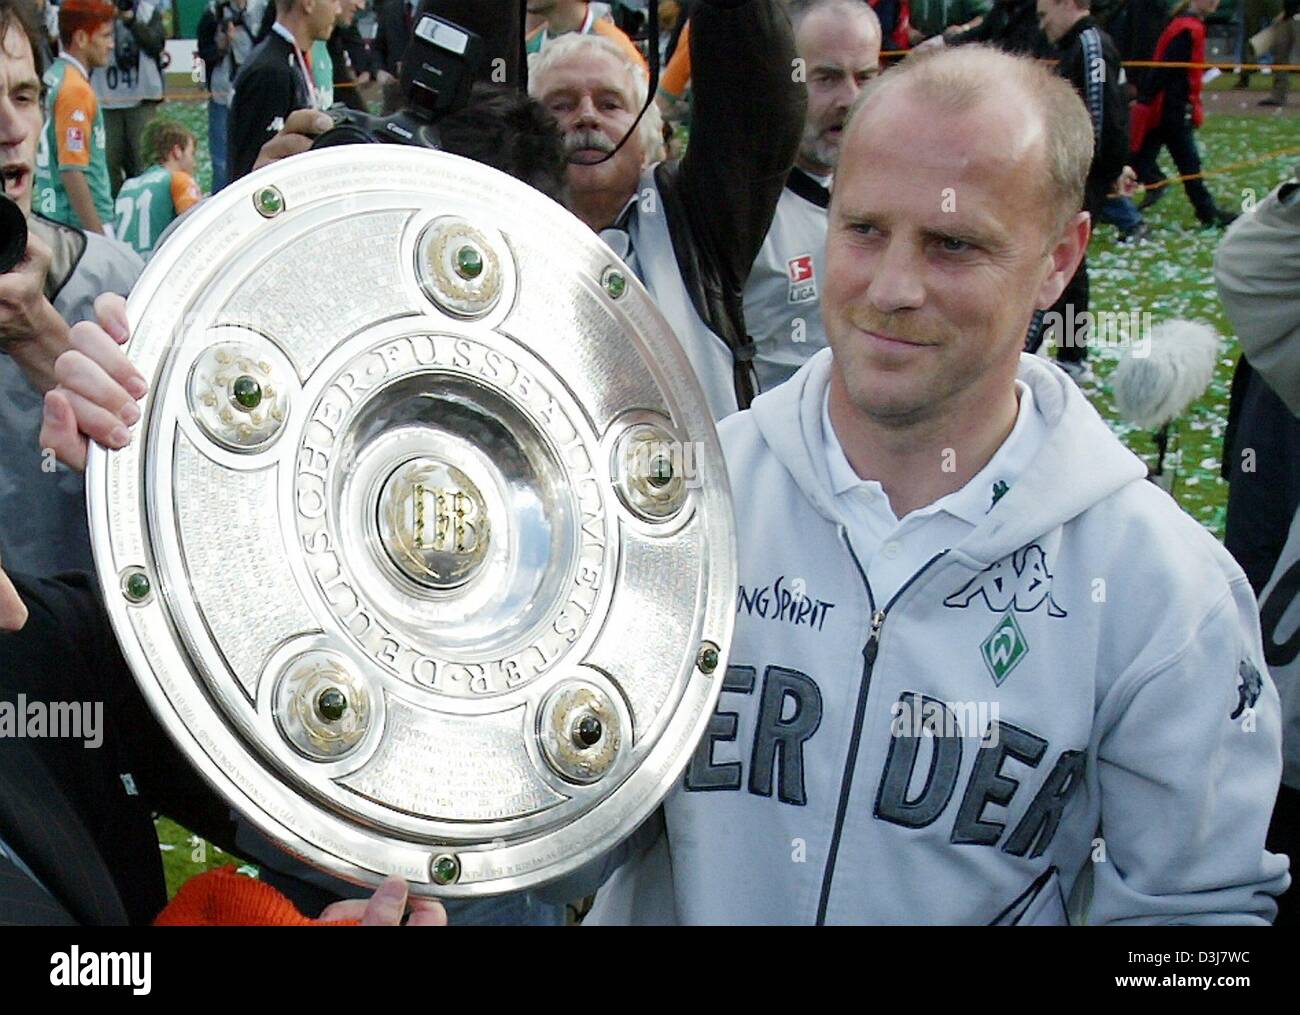 (dpa) - Bremen's soccer coach Thomas Schaaf smiles as he poses with the German Bundesliga trophy in his hand after the Bundesliga soccer game opposing SV Werder Bremen and Bayer 04 Leverkusen in Bremen, Germany, 15 May 2004. Bremen had already secured the 2003/2004 Bundesliga champion's title in the soccer game against FC Bayern Munich two days before the end of the Bundesliga seas Stock Photo